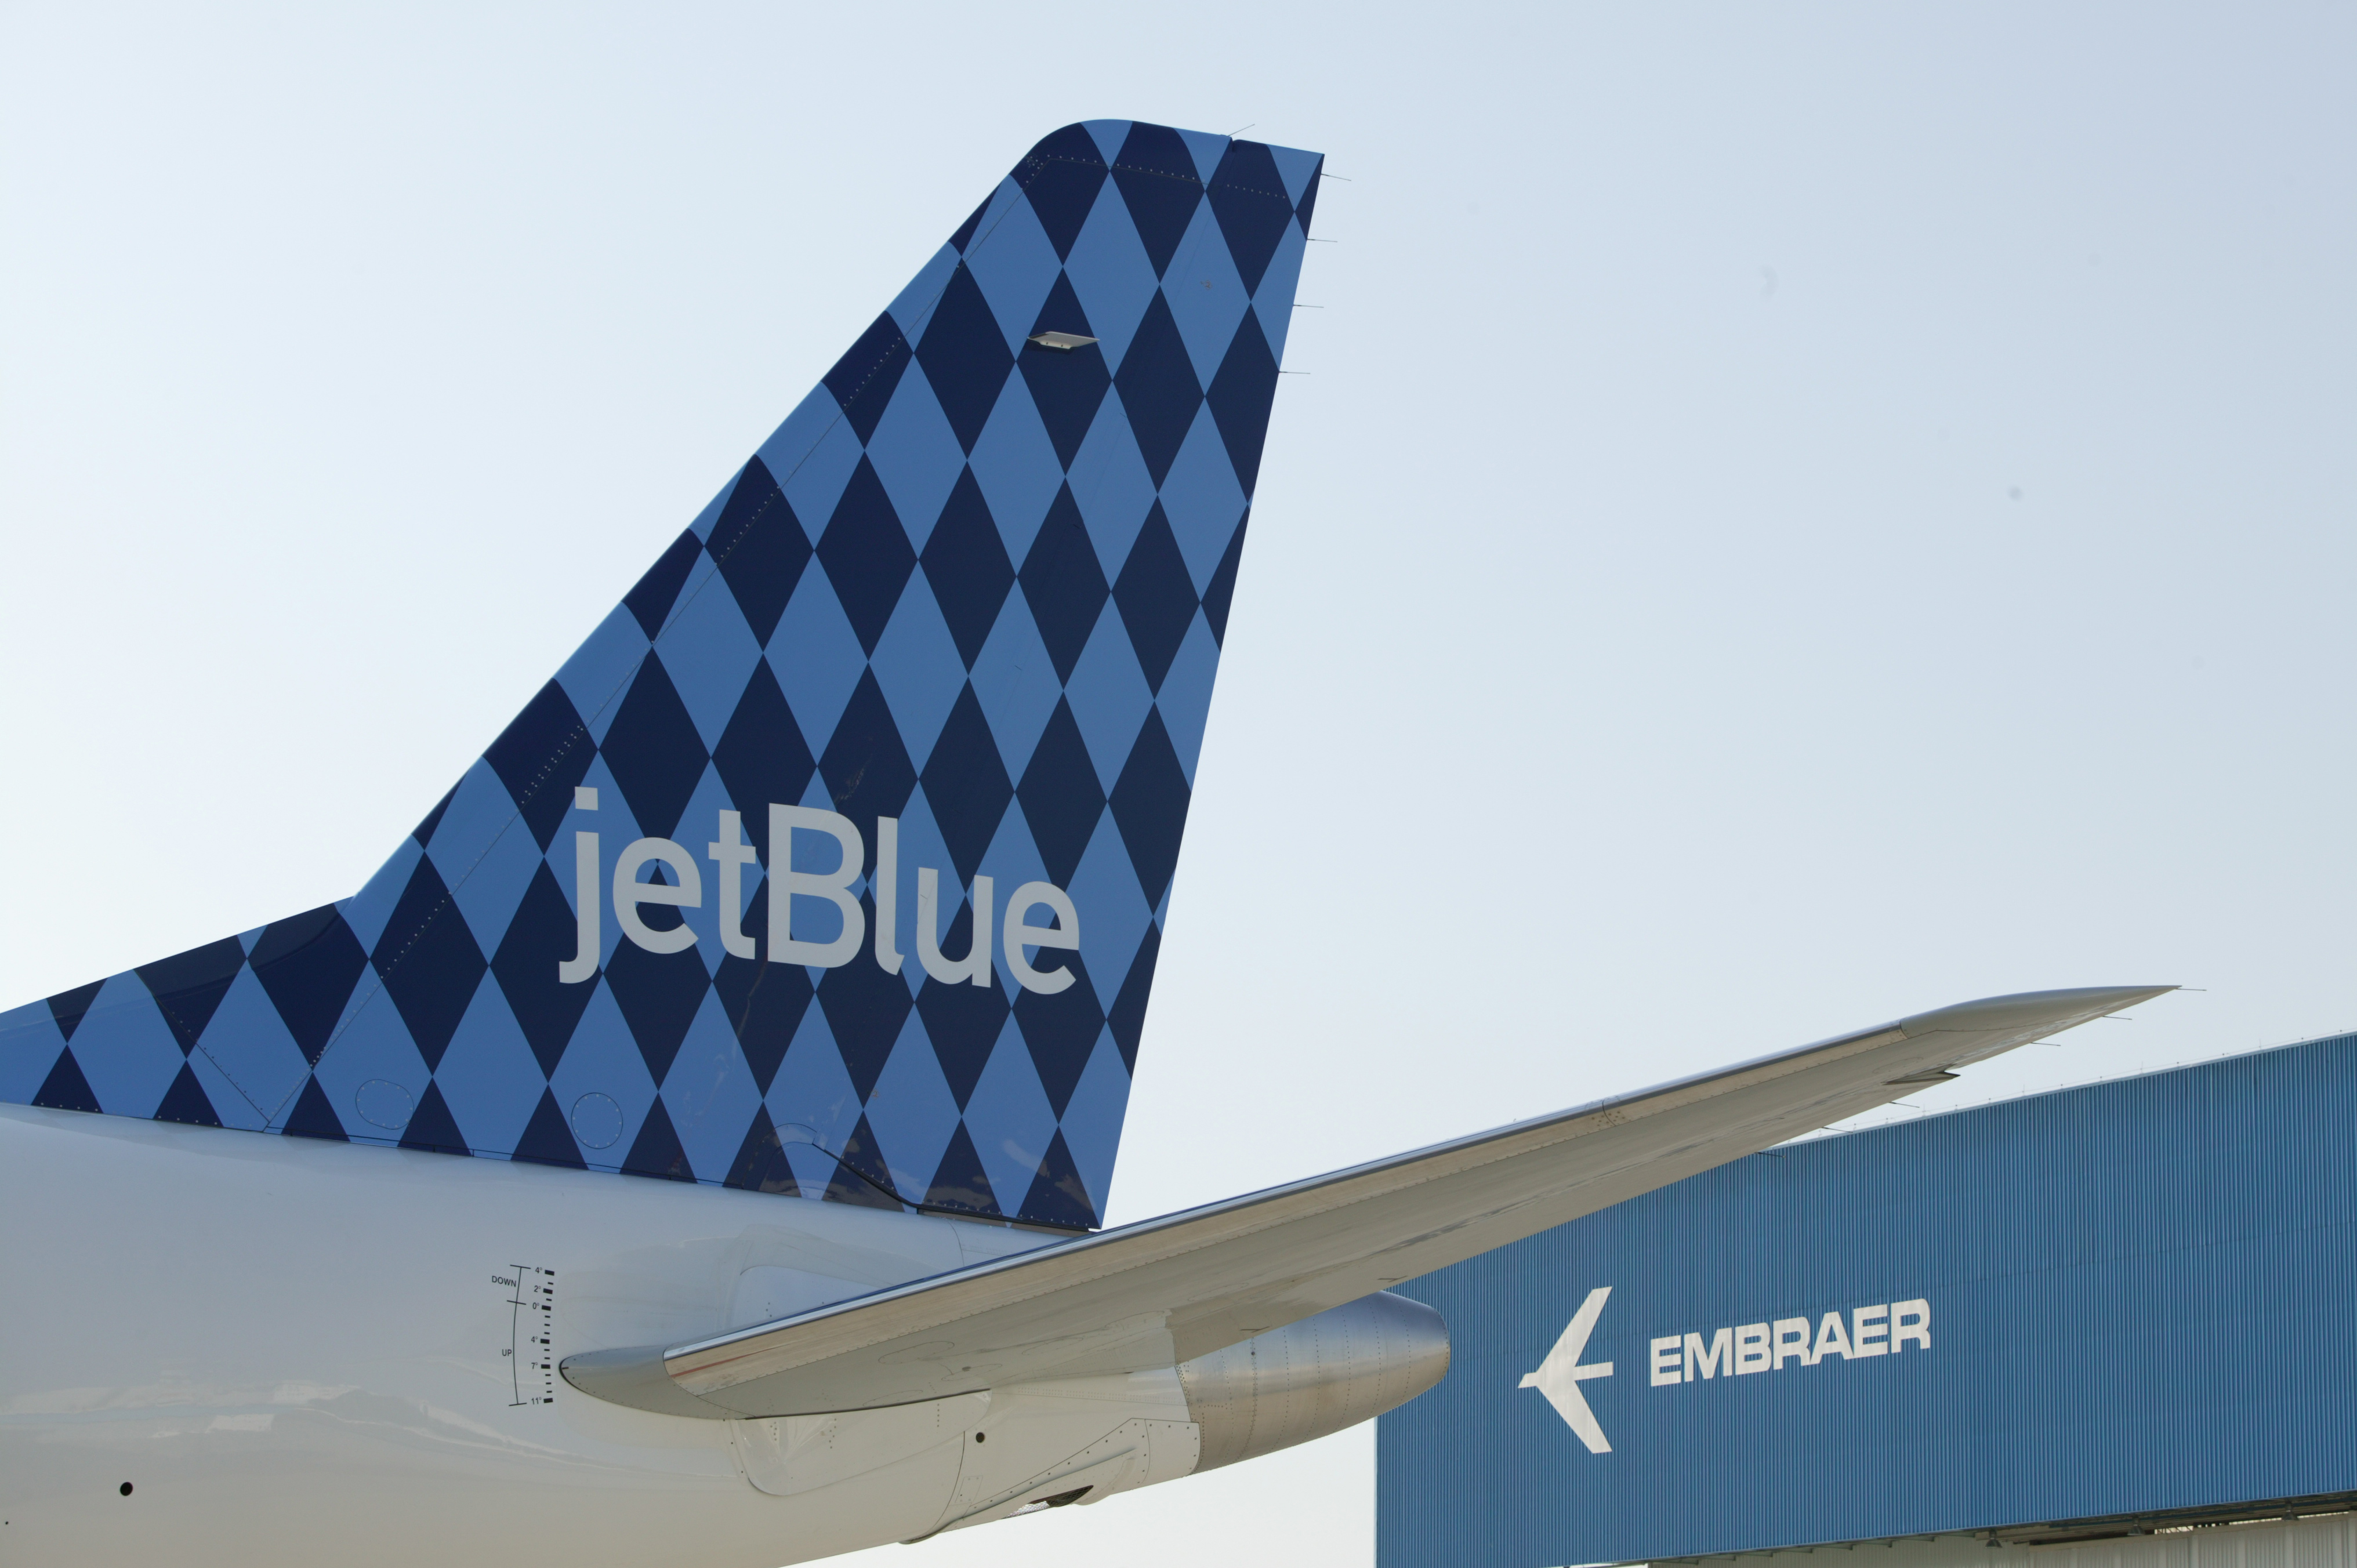 JetBlue and Embraer